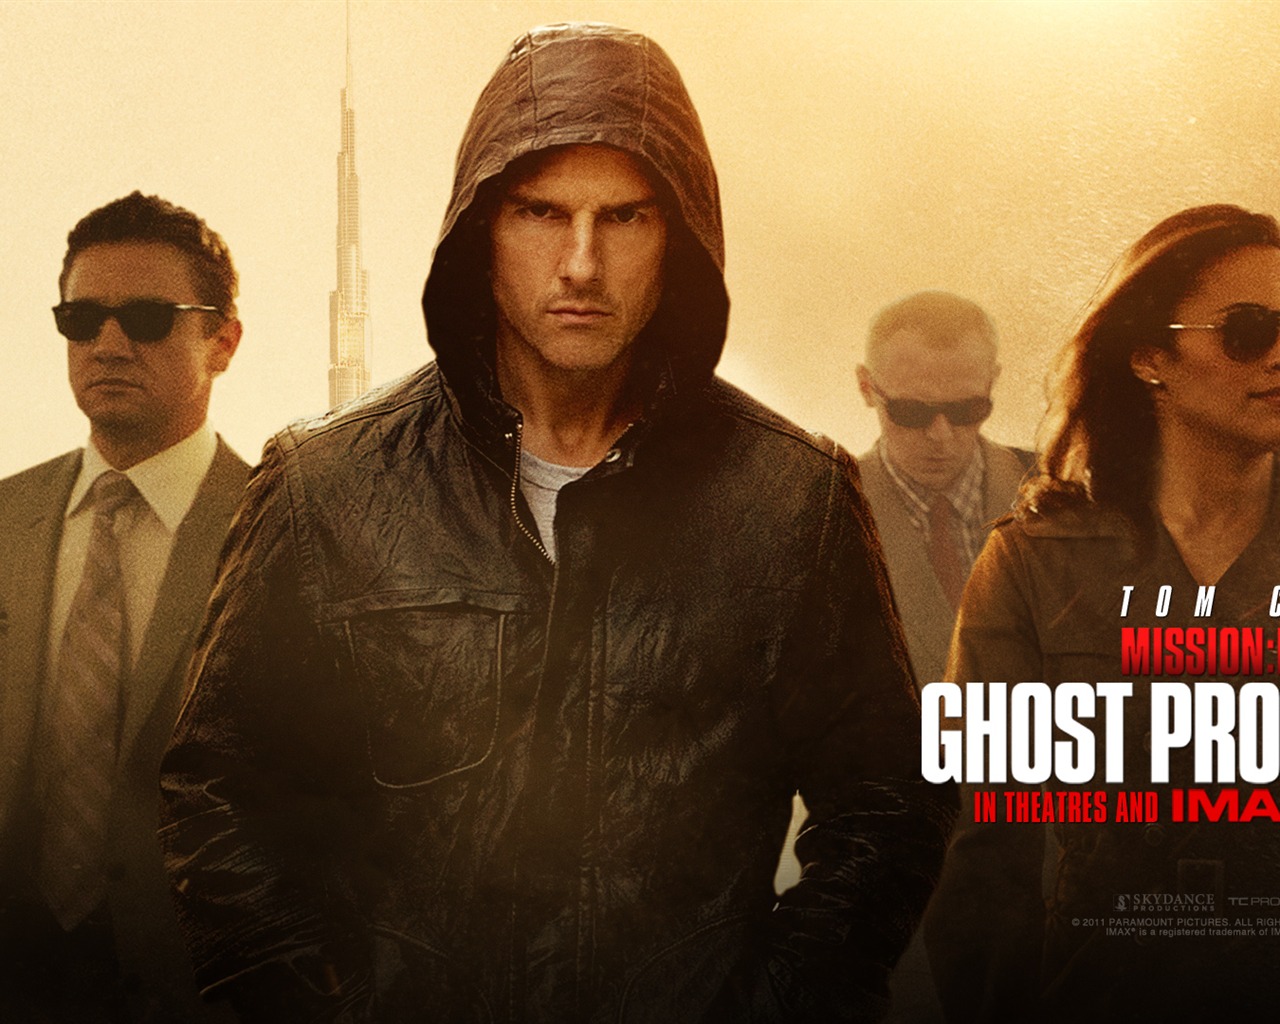 Mission: Impossible - Ghost Protocol wallpapers HD #1 - 1280x1024